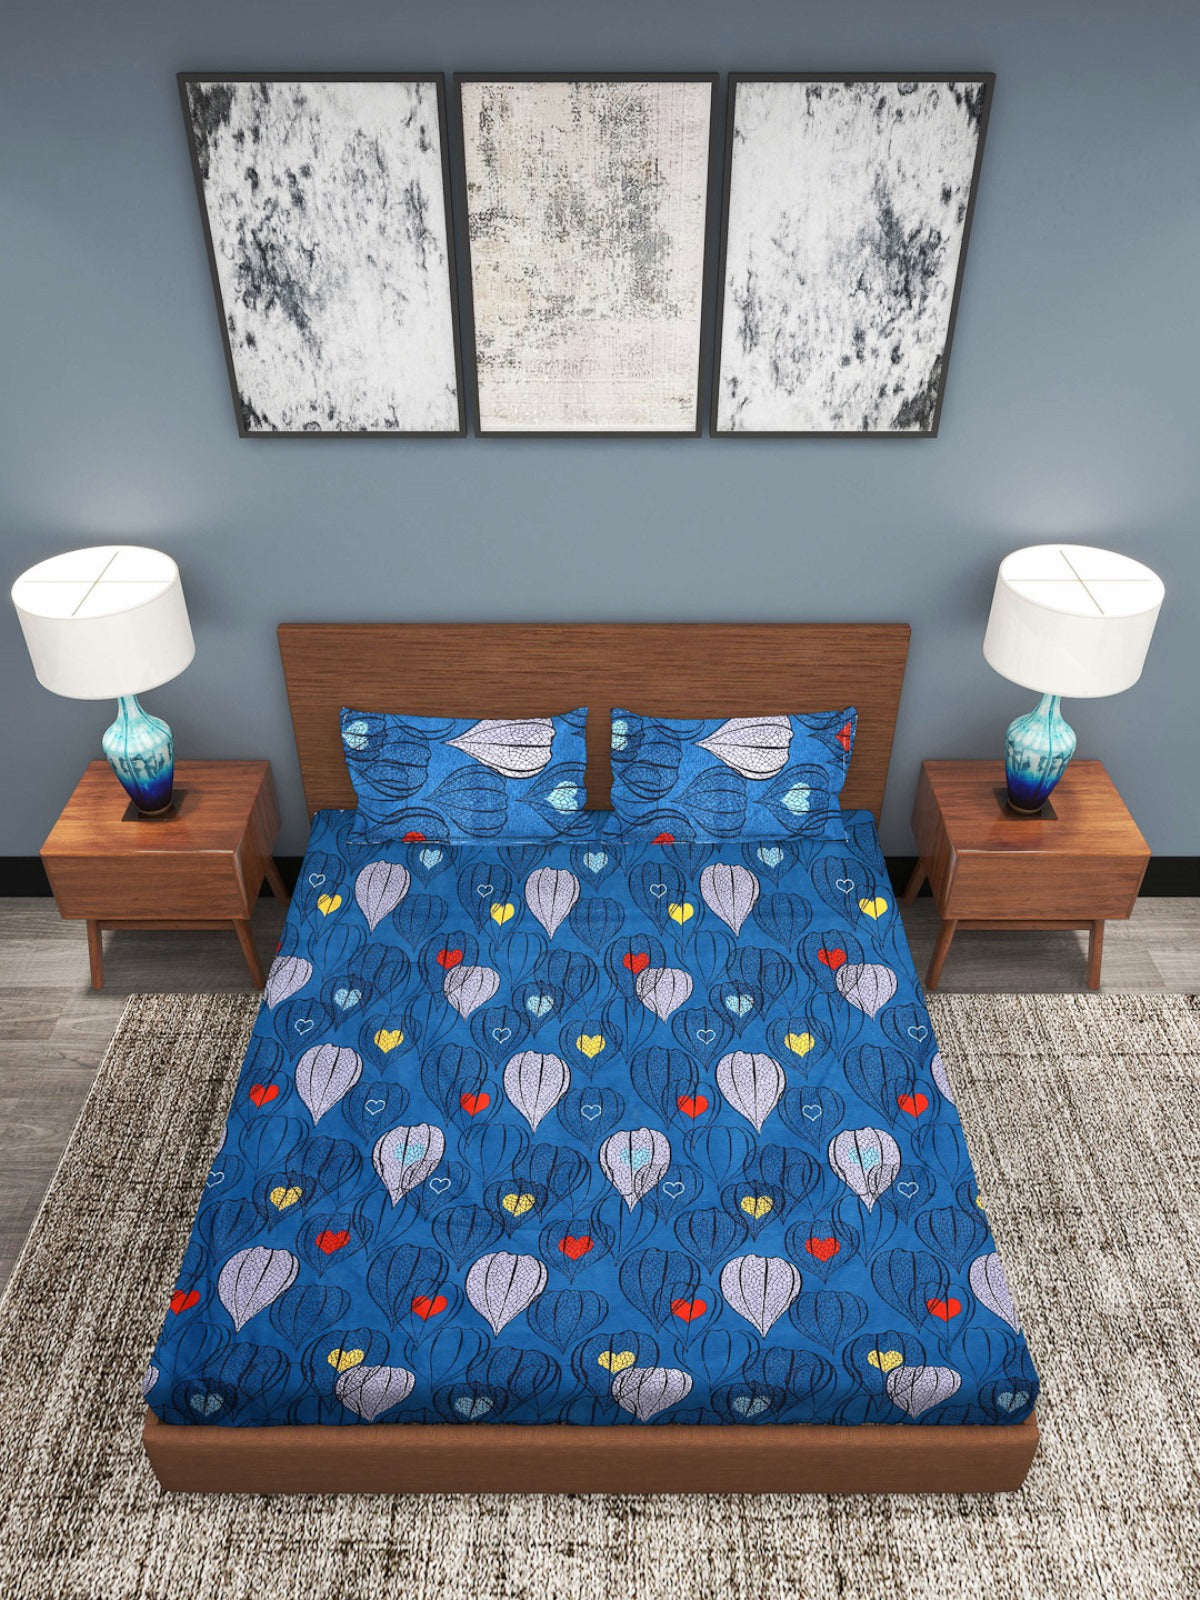 Blue Printed Patterned 210 TC Queen Bedsheet with 2 Pillow Covers